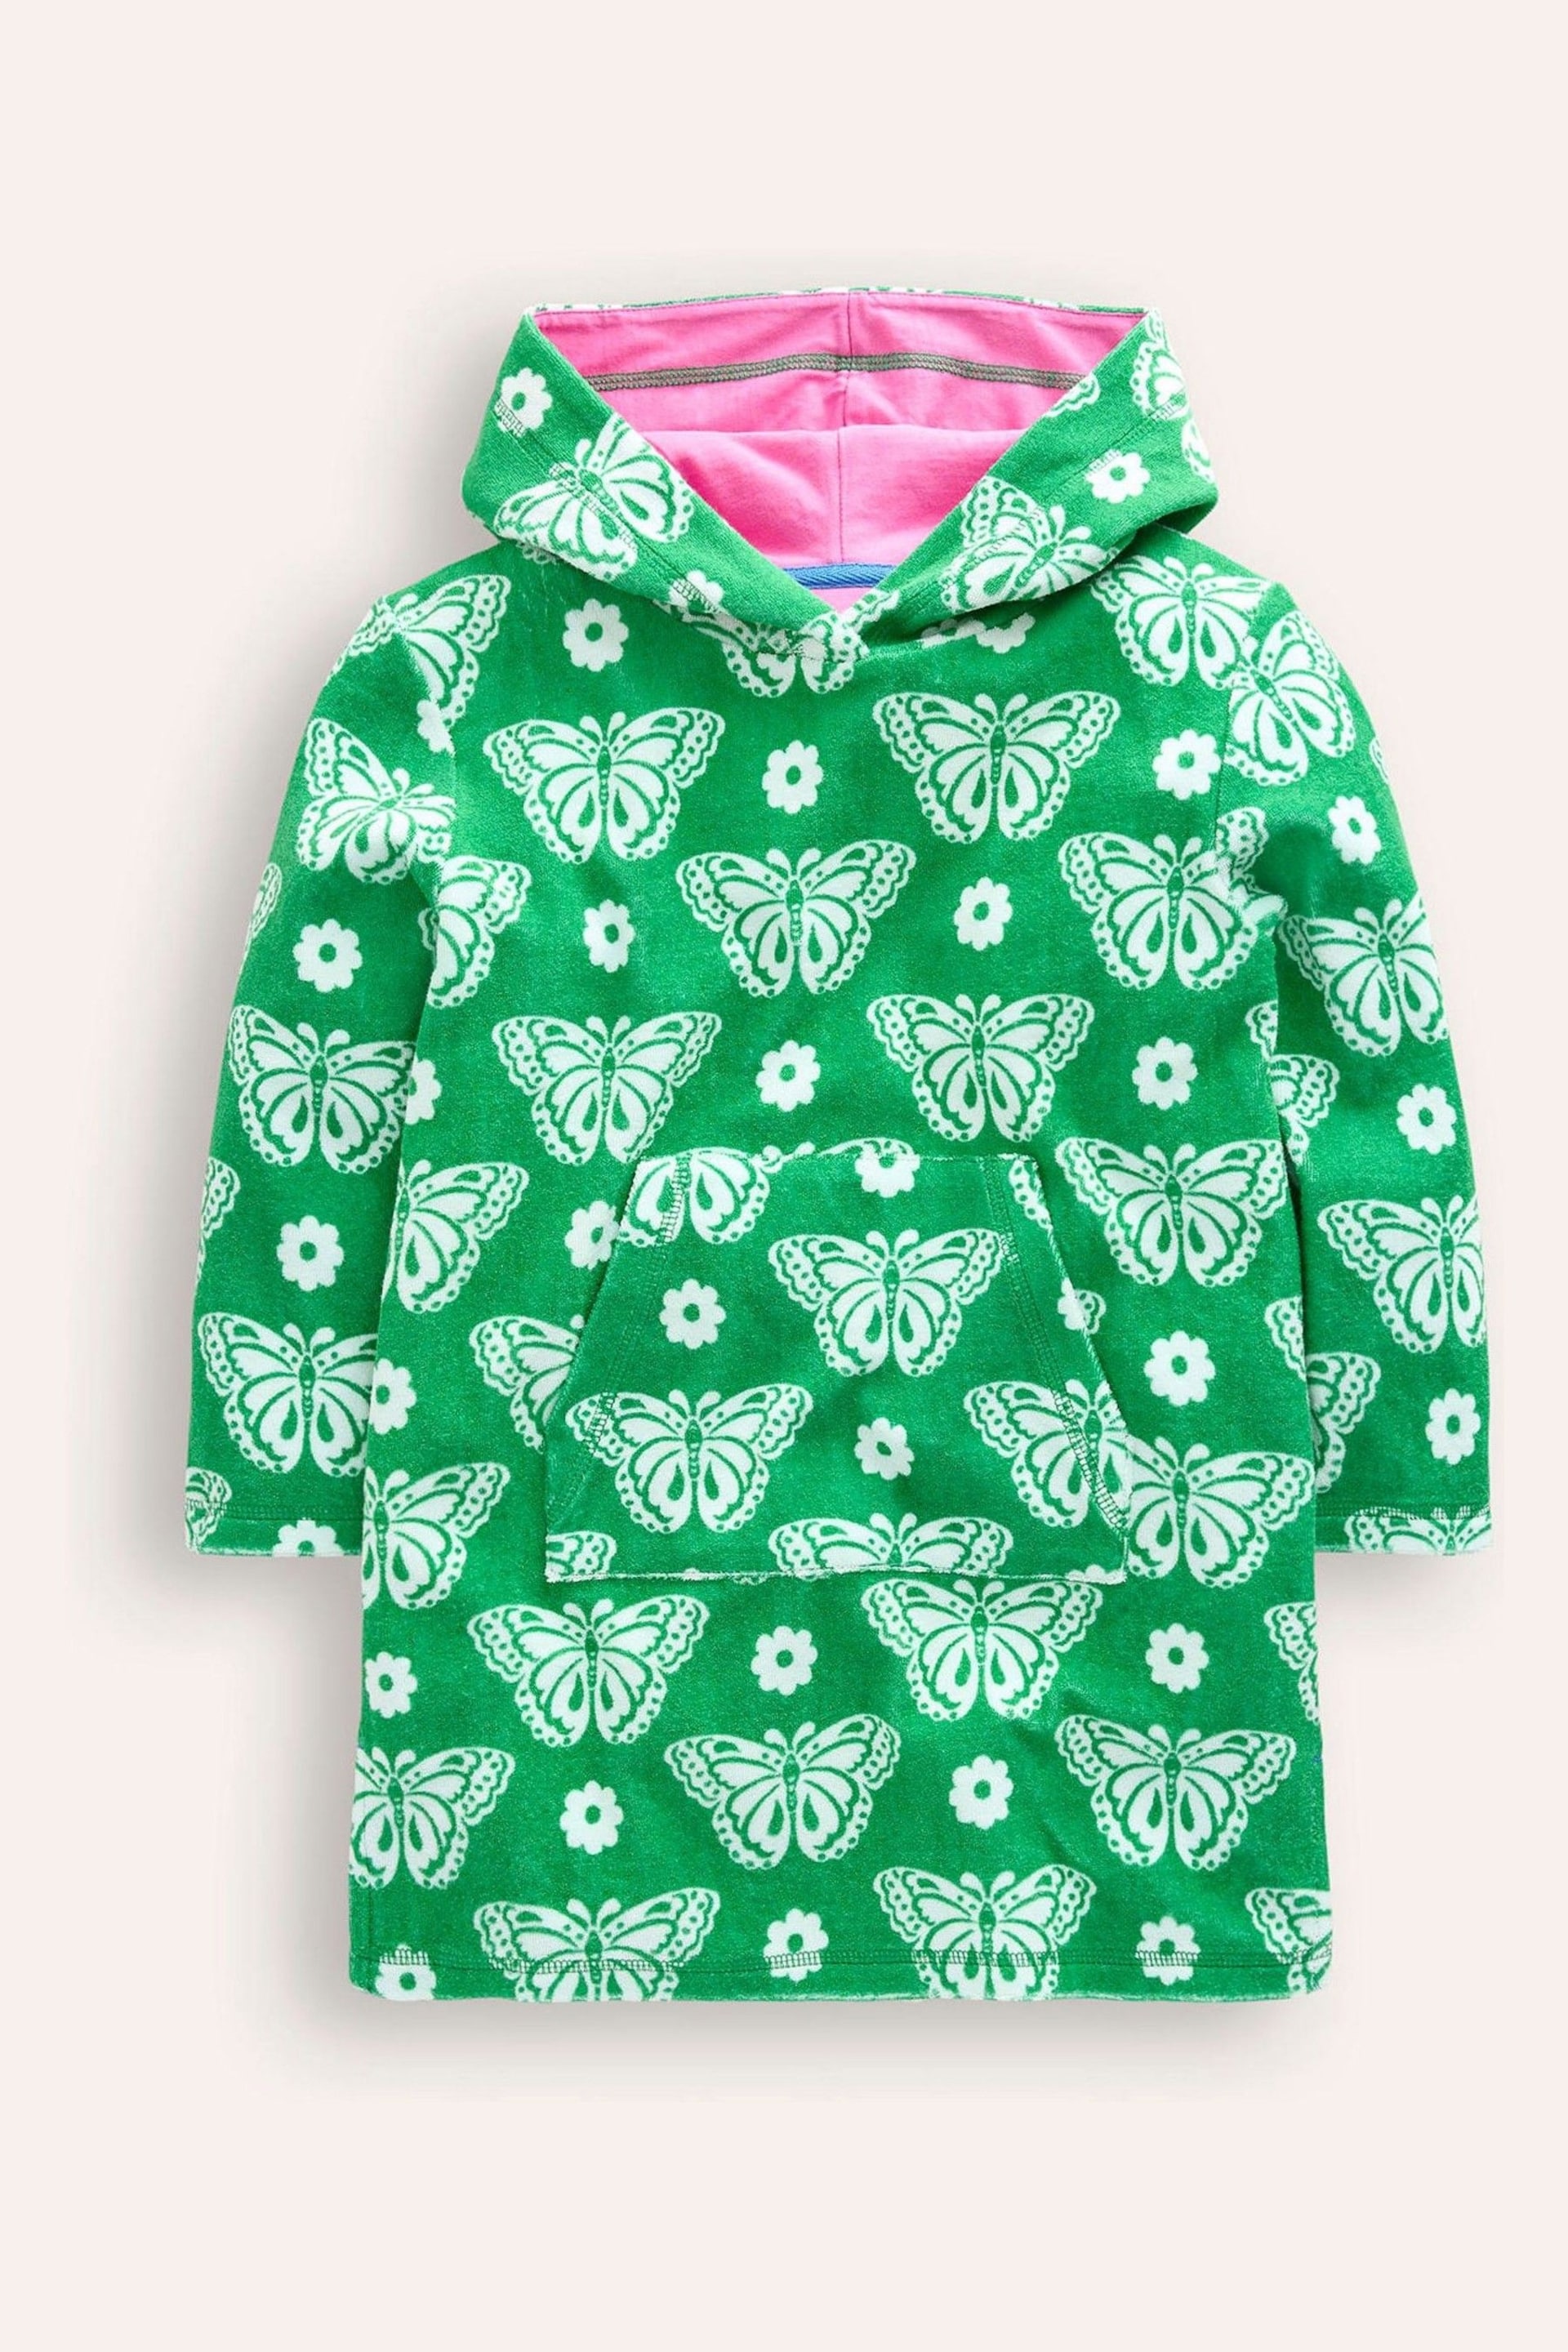 Boden Green Butterfly Towelling Throw-On Dress - Image 2 of 4